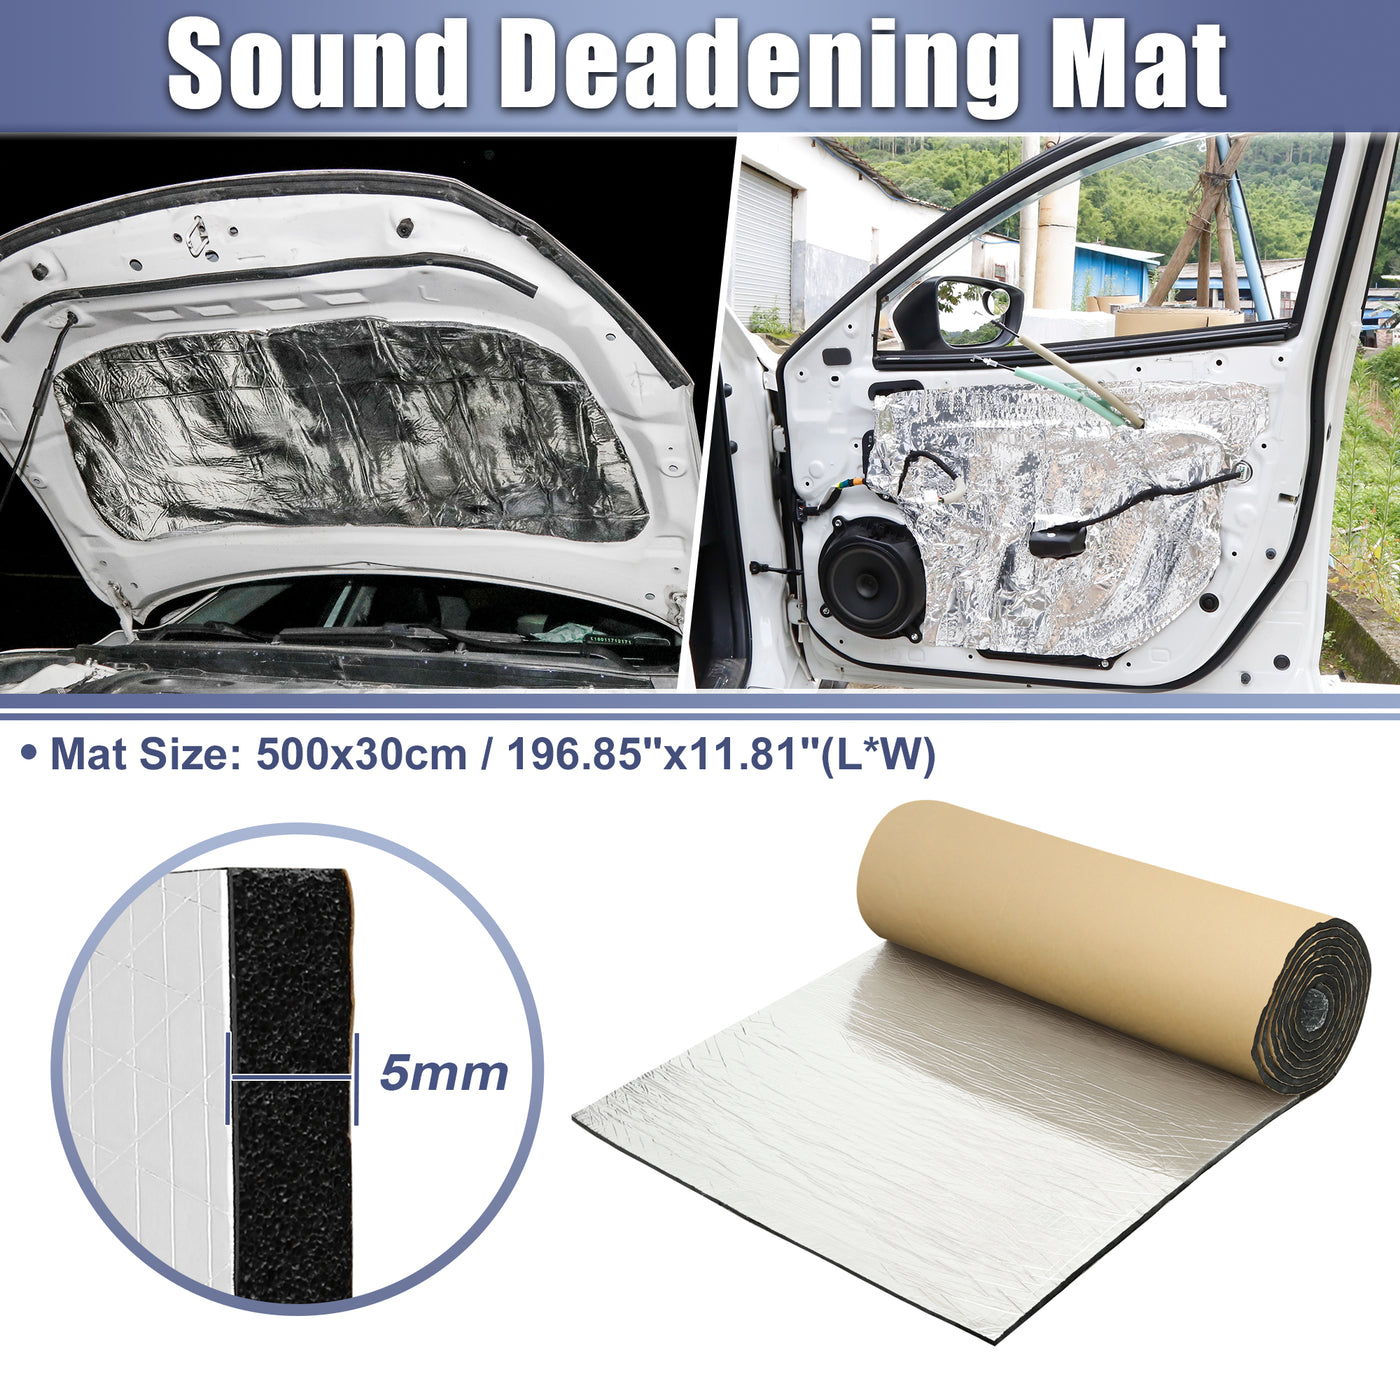 X AUTOHAUX 197mil 5mm 16.14sqft Car Sound Deadening Mat Aluminum Foil Closed Cell Foam Heat Shield Material Self Adhesive Universal for Hood Fender and Boat Engine Cover 196.85"x11.81"